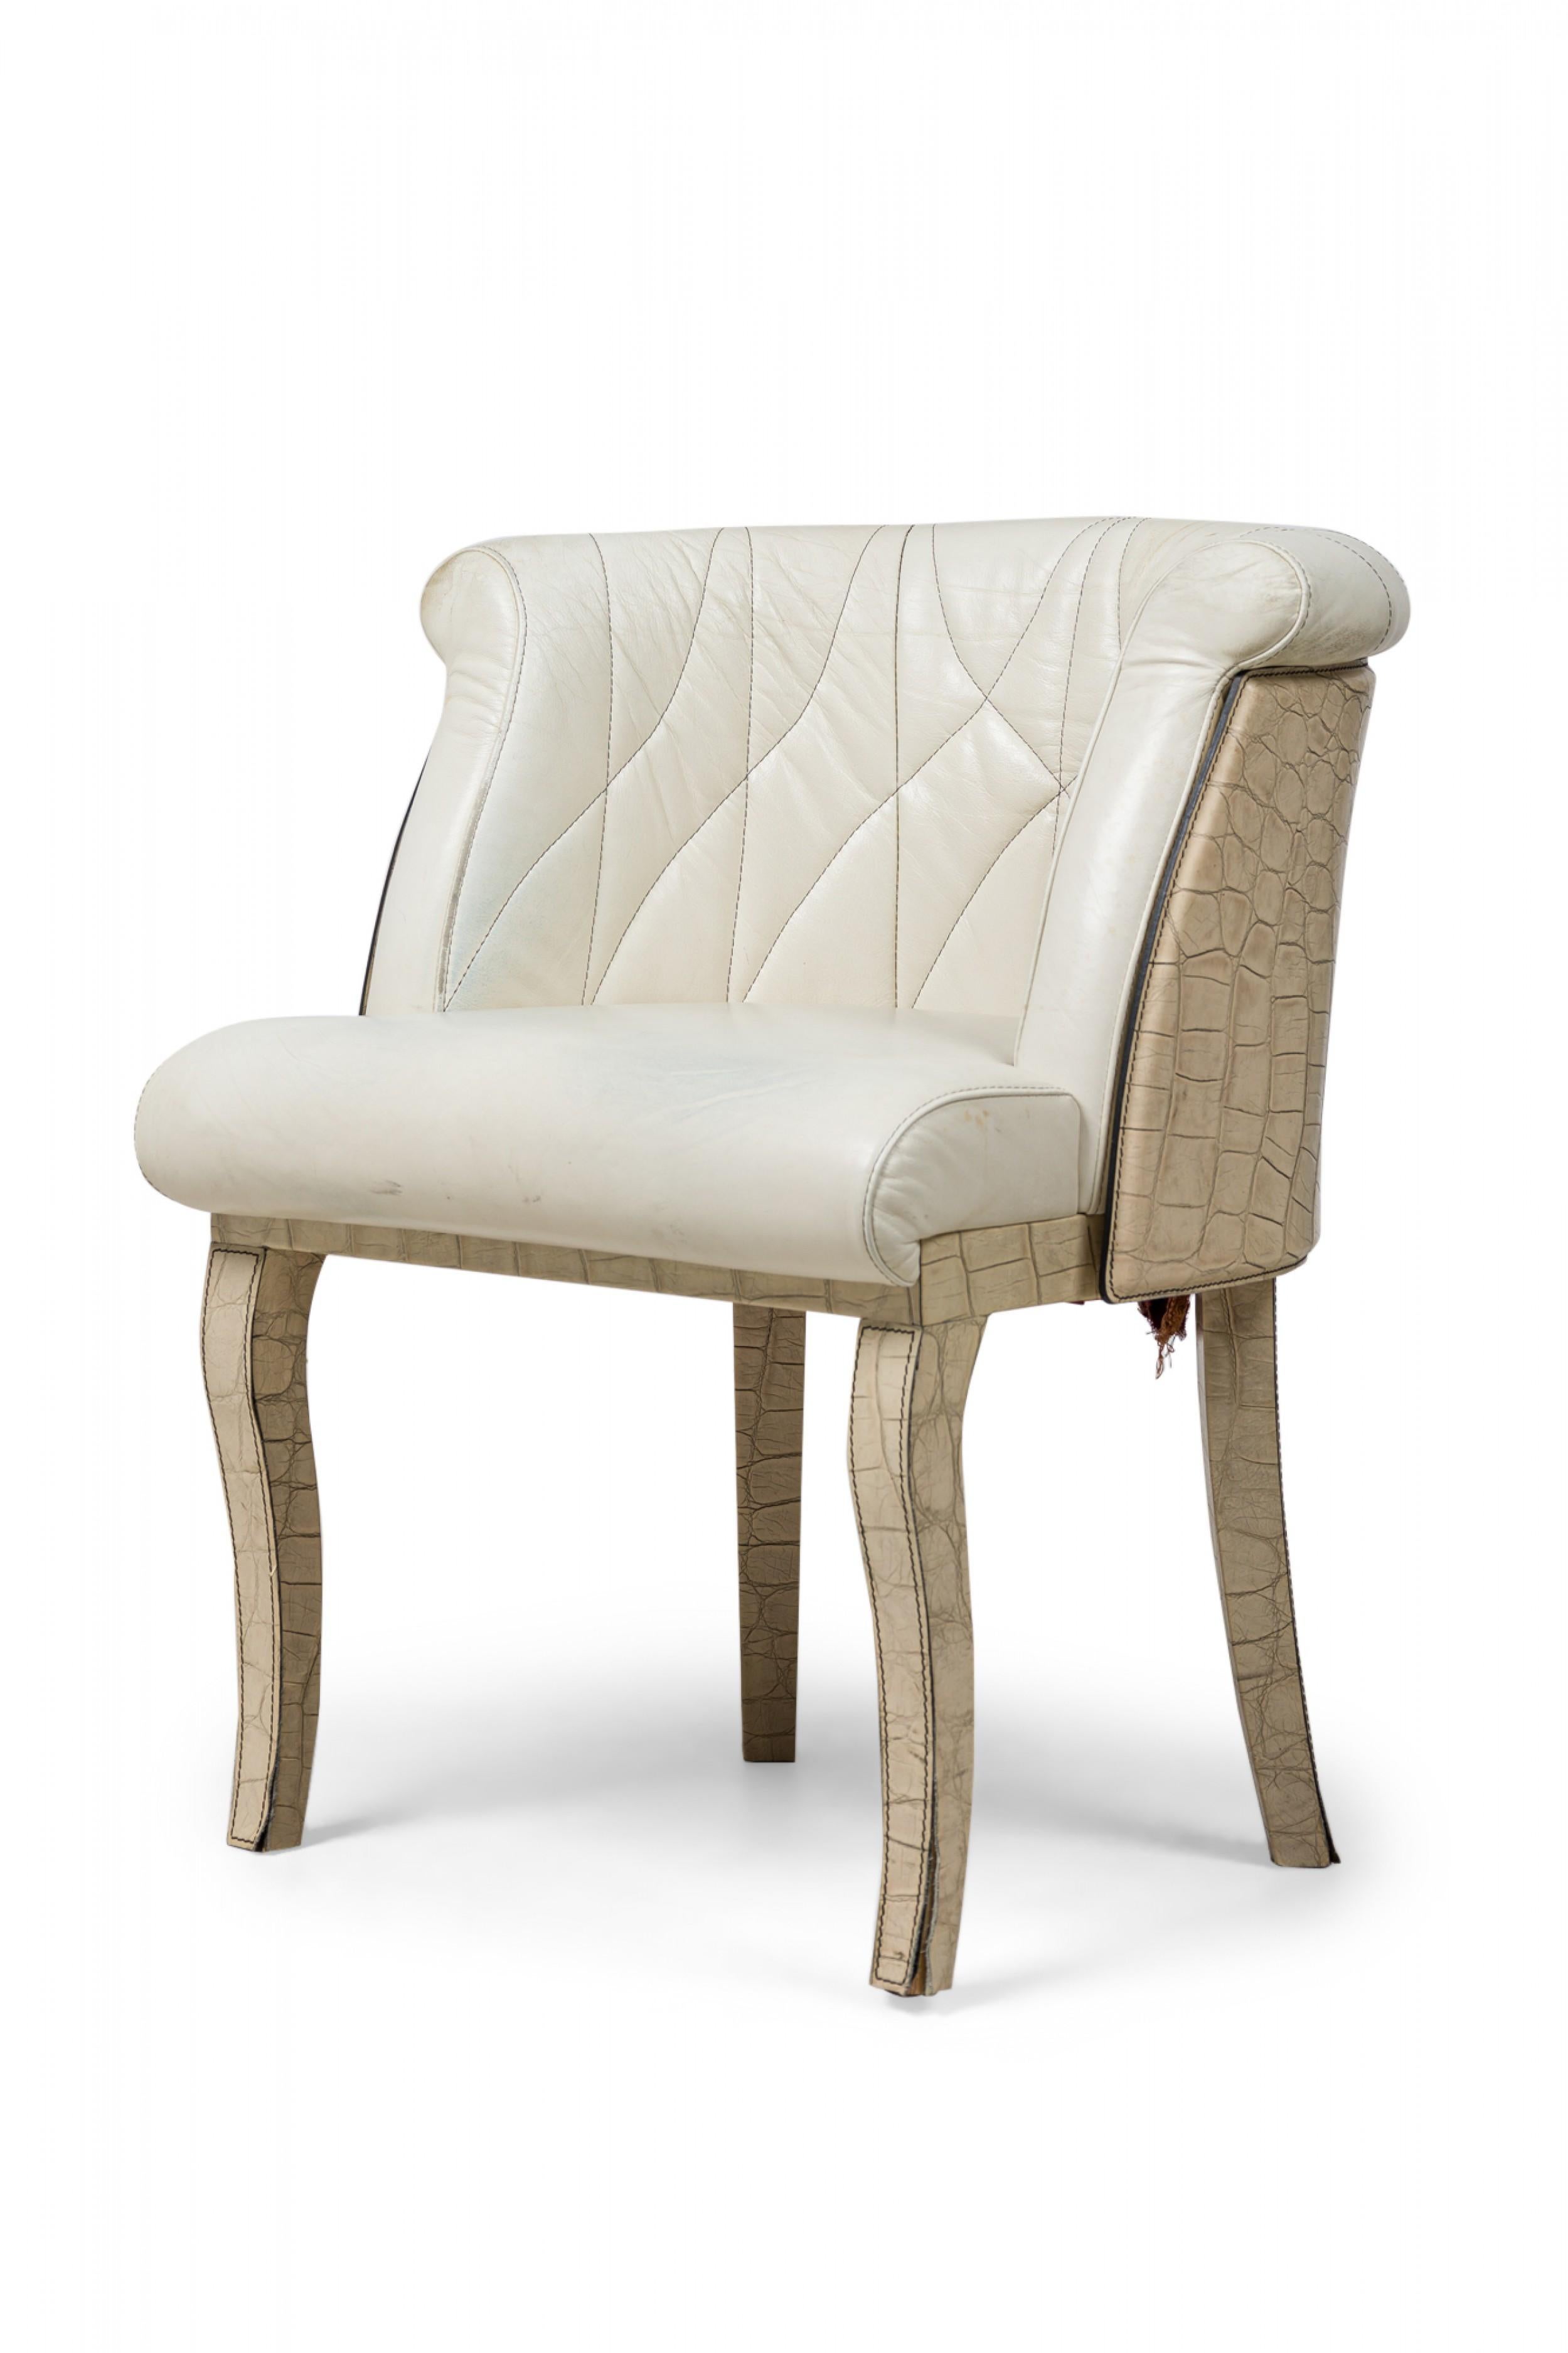 Midcentury American faux snakeskin dining / side chair with a curved back, padded seat overlapping the back, quilted and upholstered in beige leather, standing on 2 front cabriole legs and slightly splayed back legs.